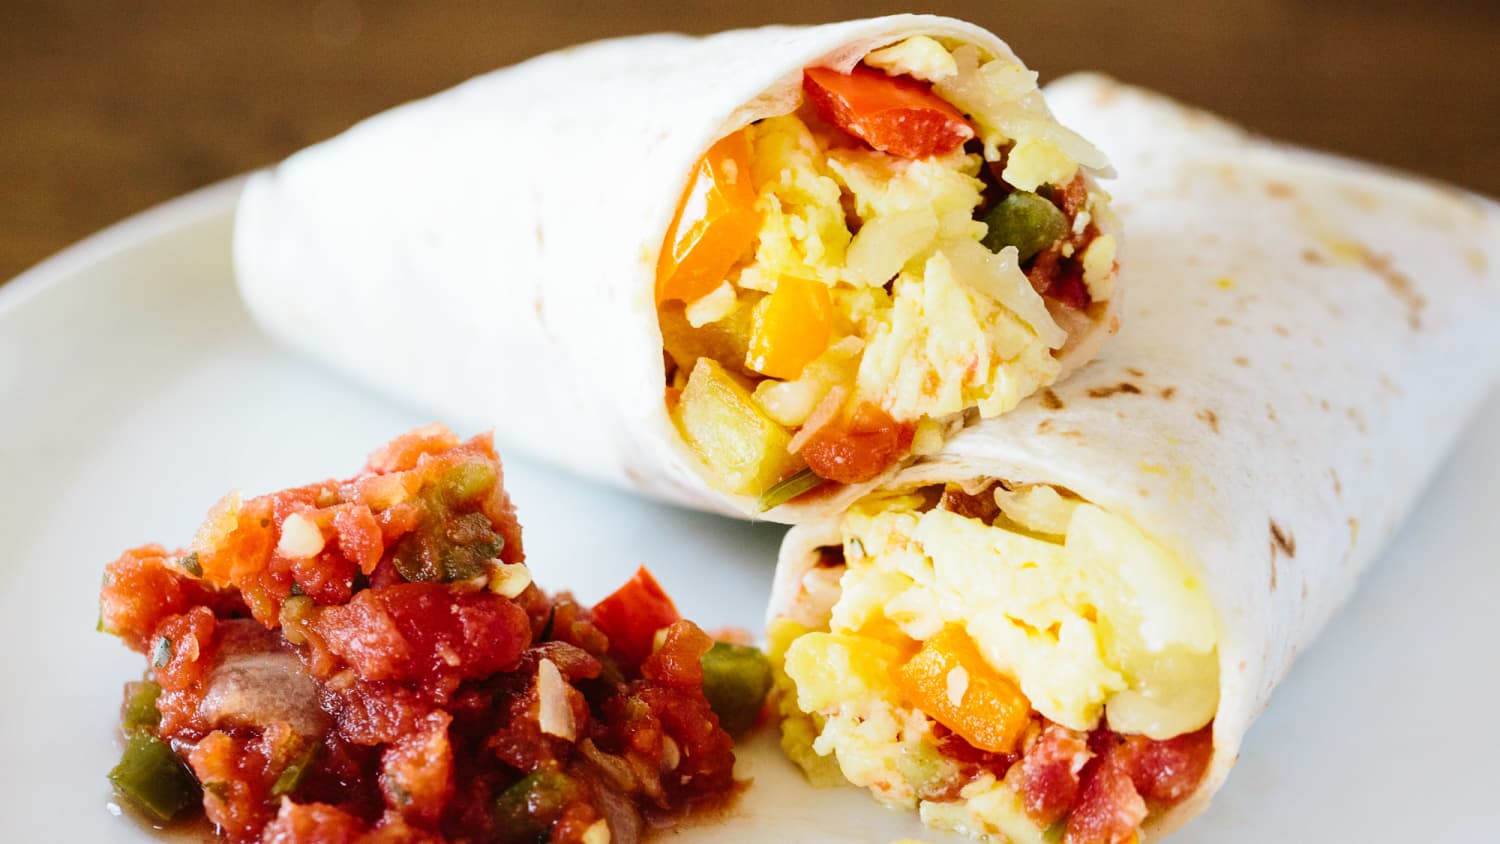 How to Make Frozen Burritos for Meal Prep